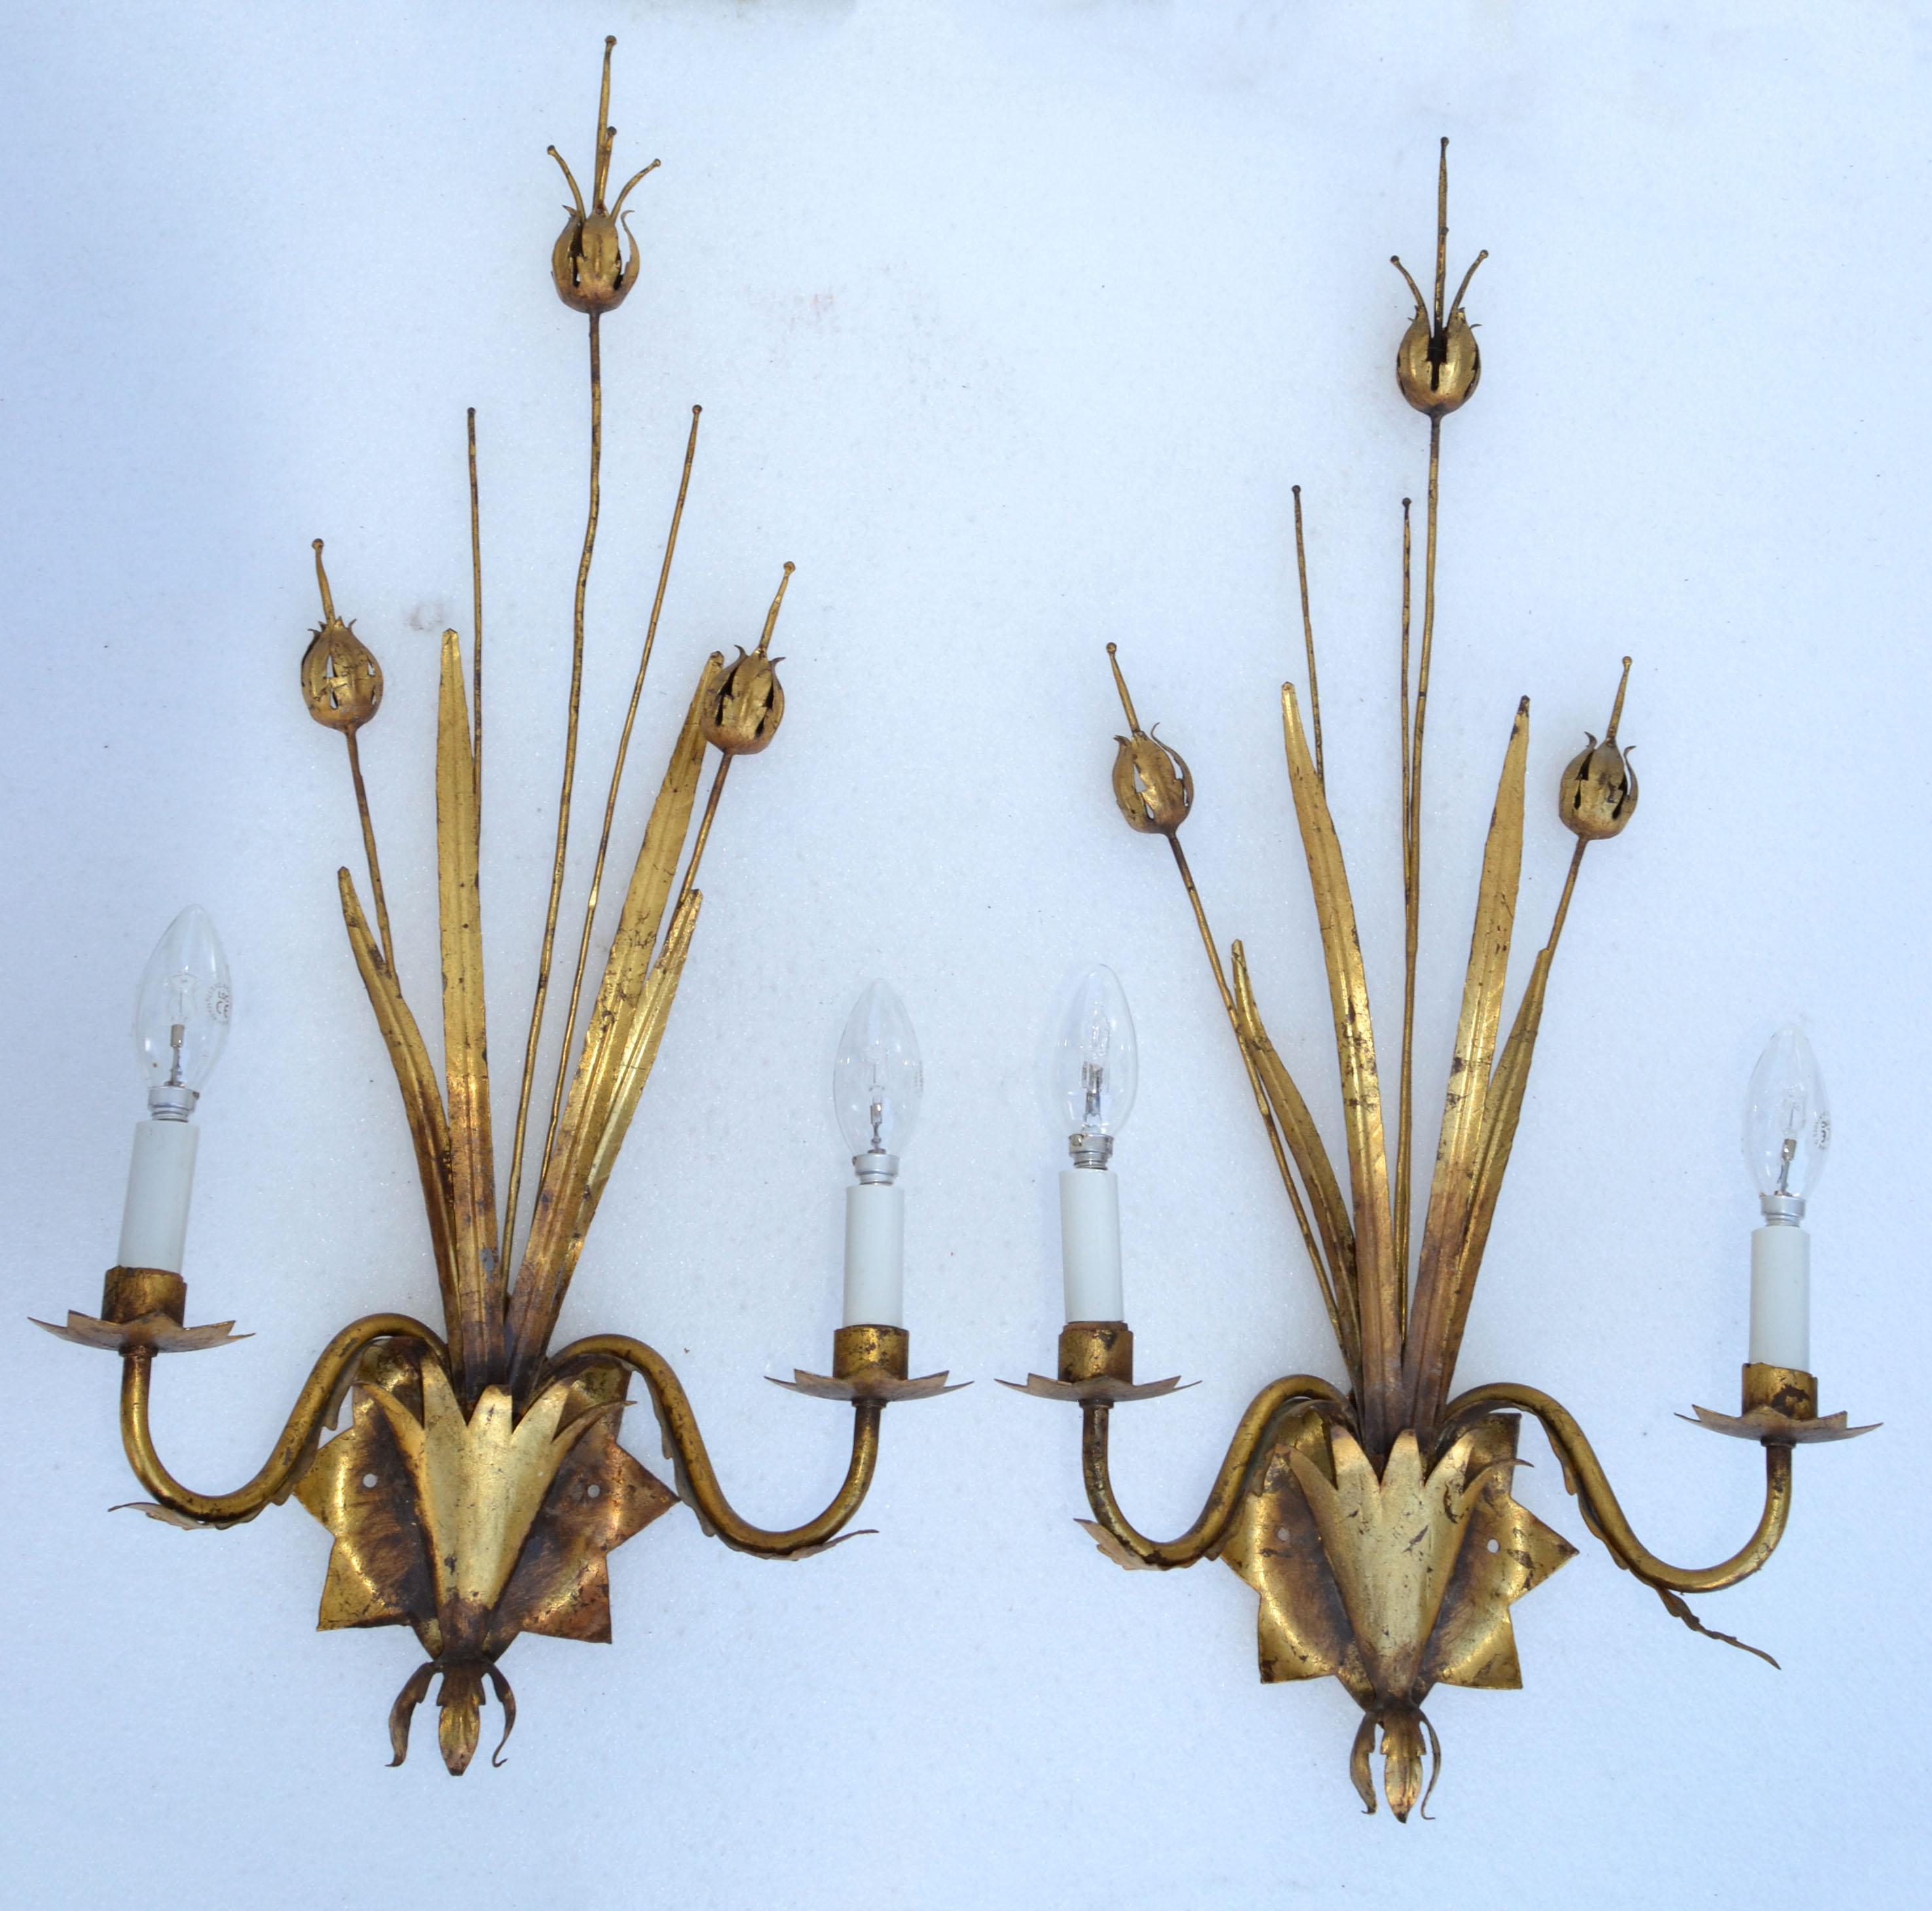 Pair of Large Ferrocolor Sconces Wheat Wall Lights Mid-Century Modern Spain 1960 For Sale 7